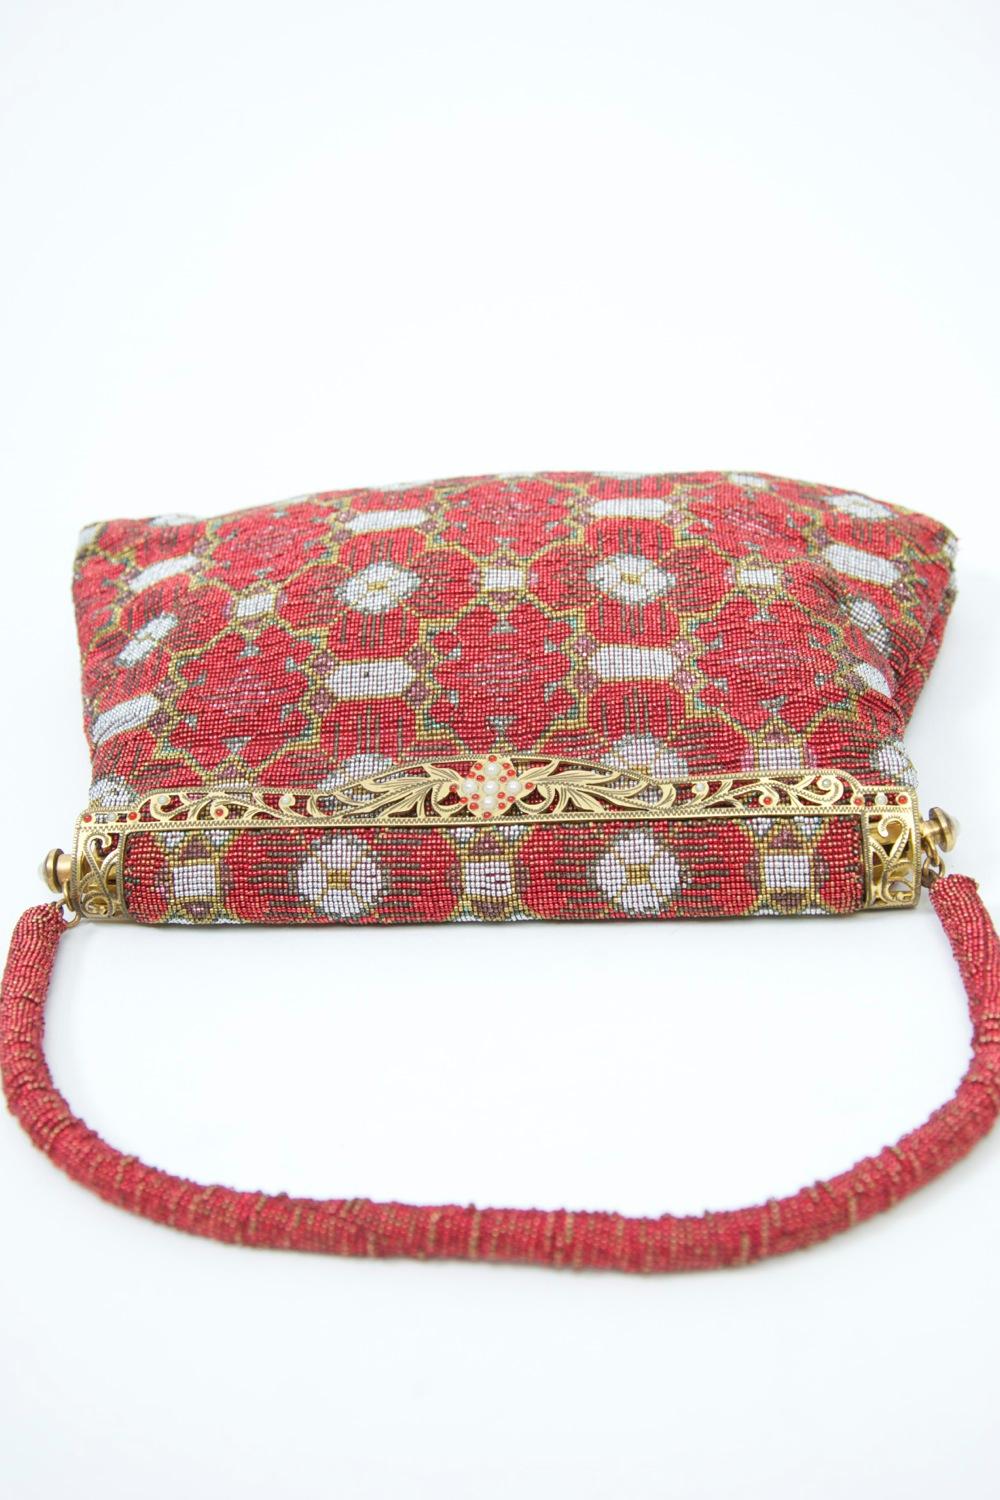 Red Beaded Evening Bag, France 1